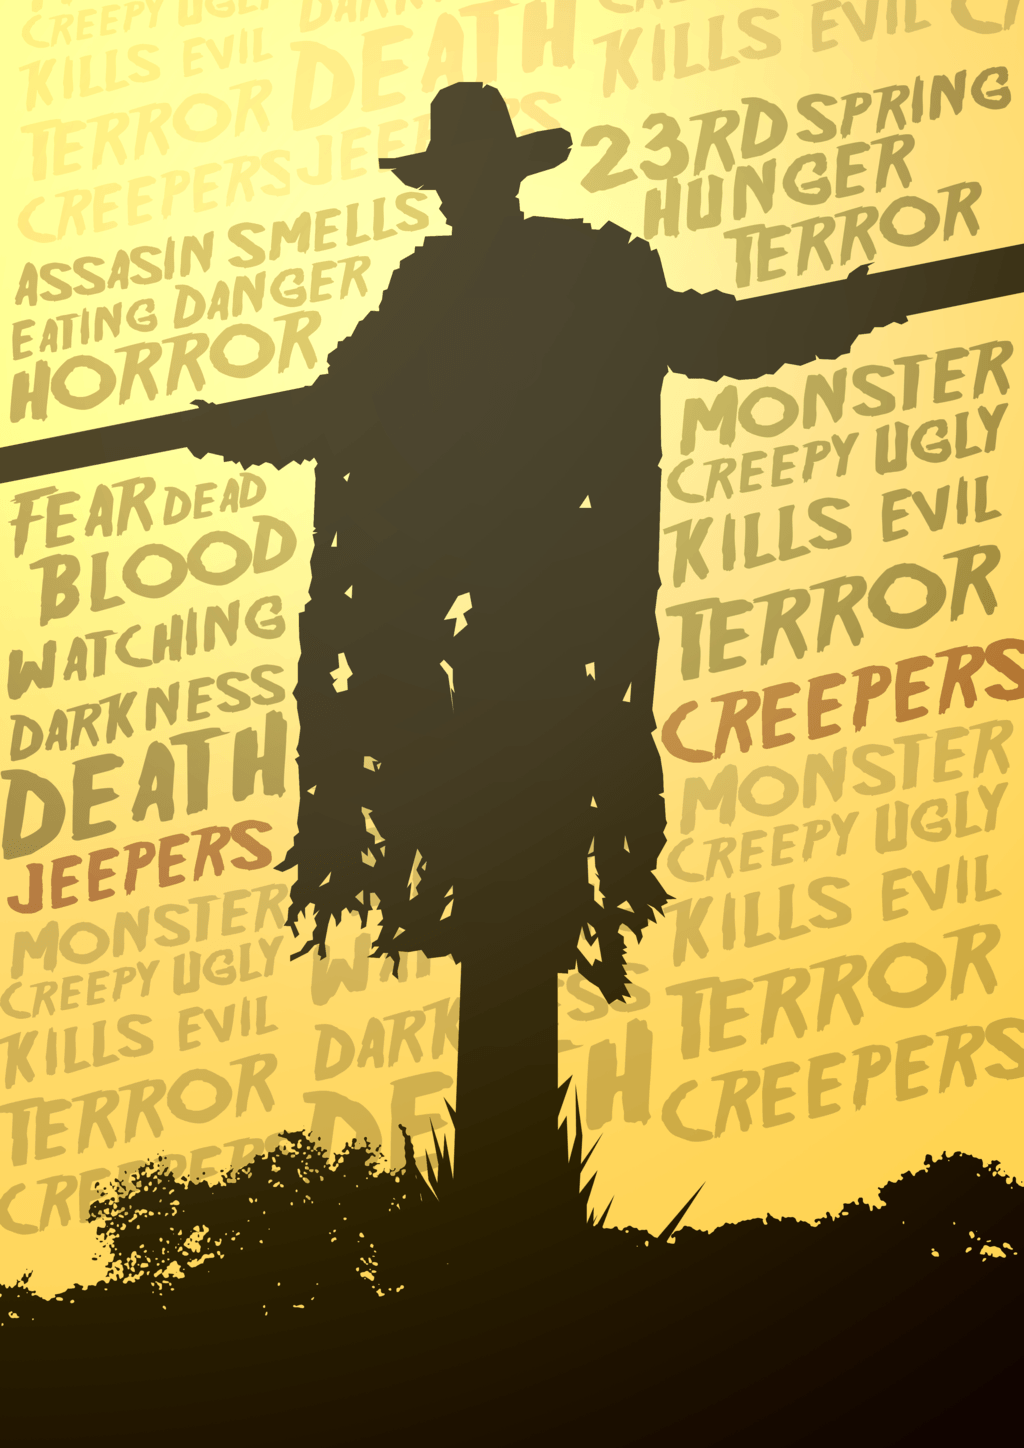 Want a Role in “Jeepers Creepers Part 3”? Find Out How! Production